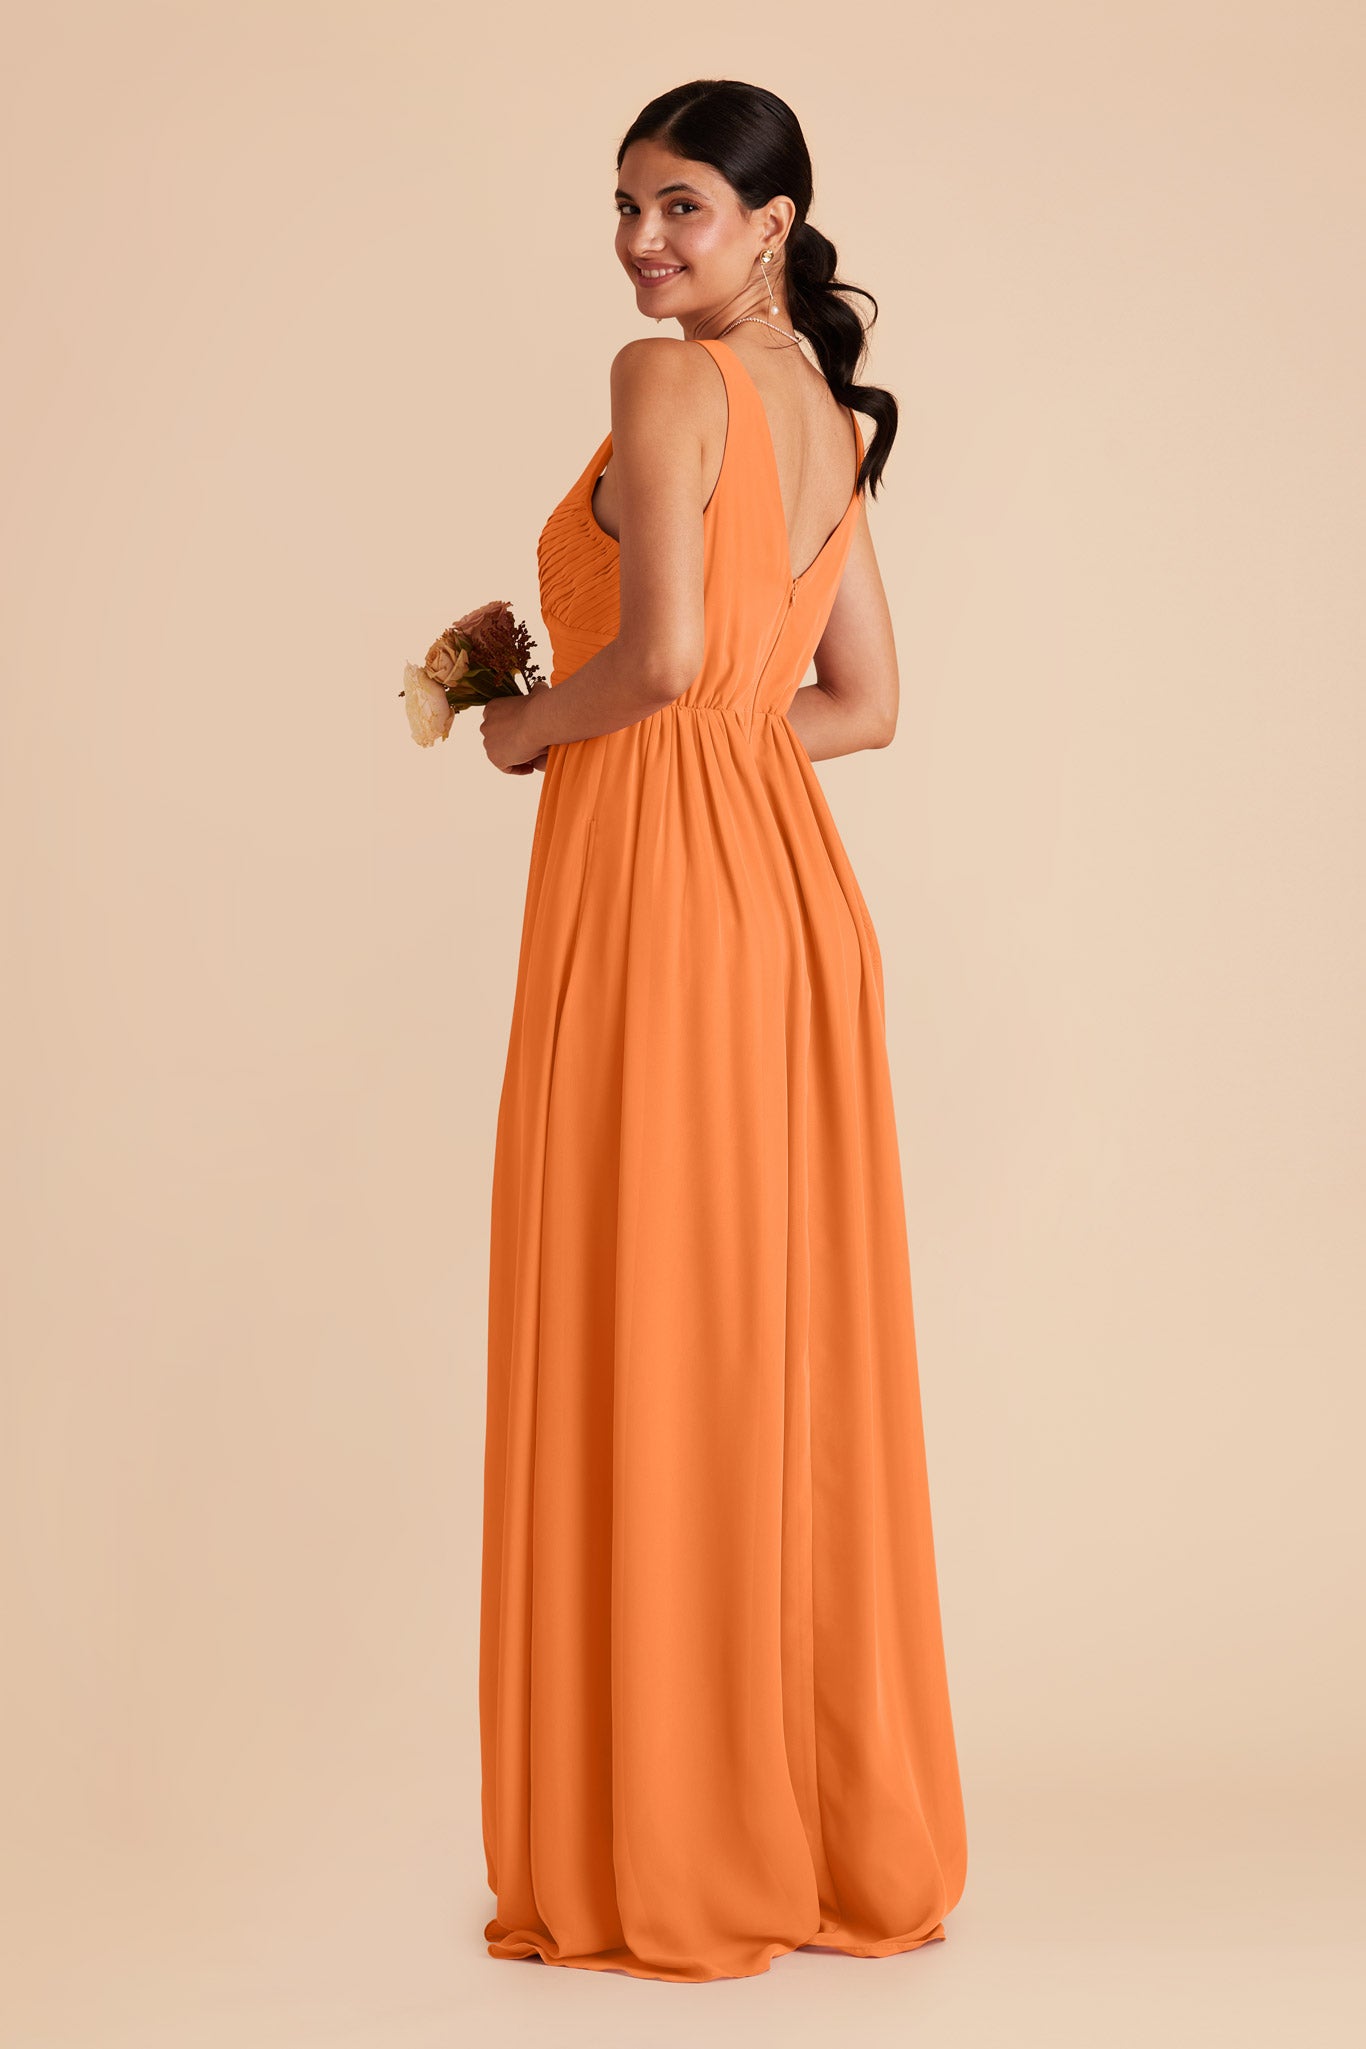 Apricot Laurie Empire Dress by Birdy Grey